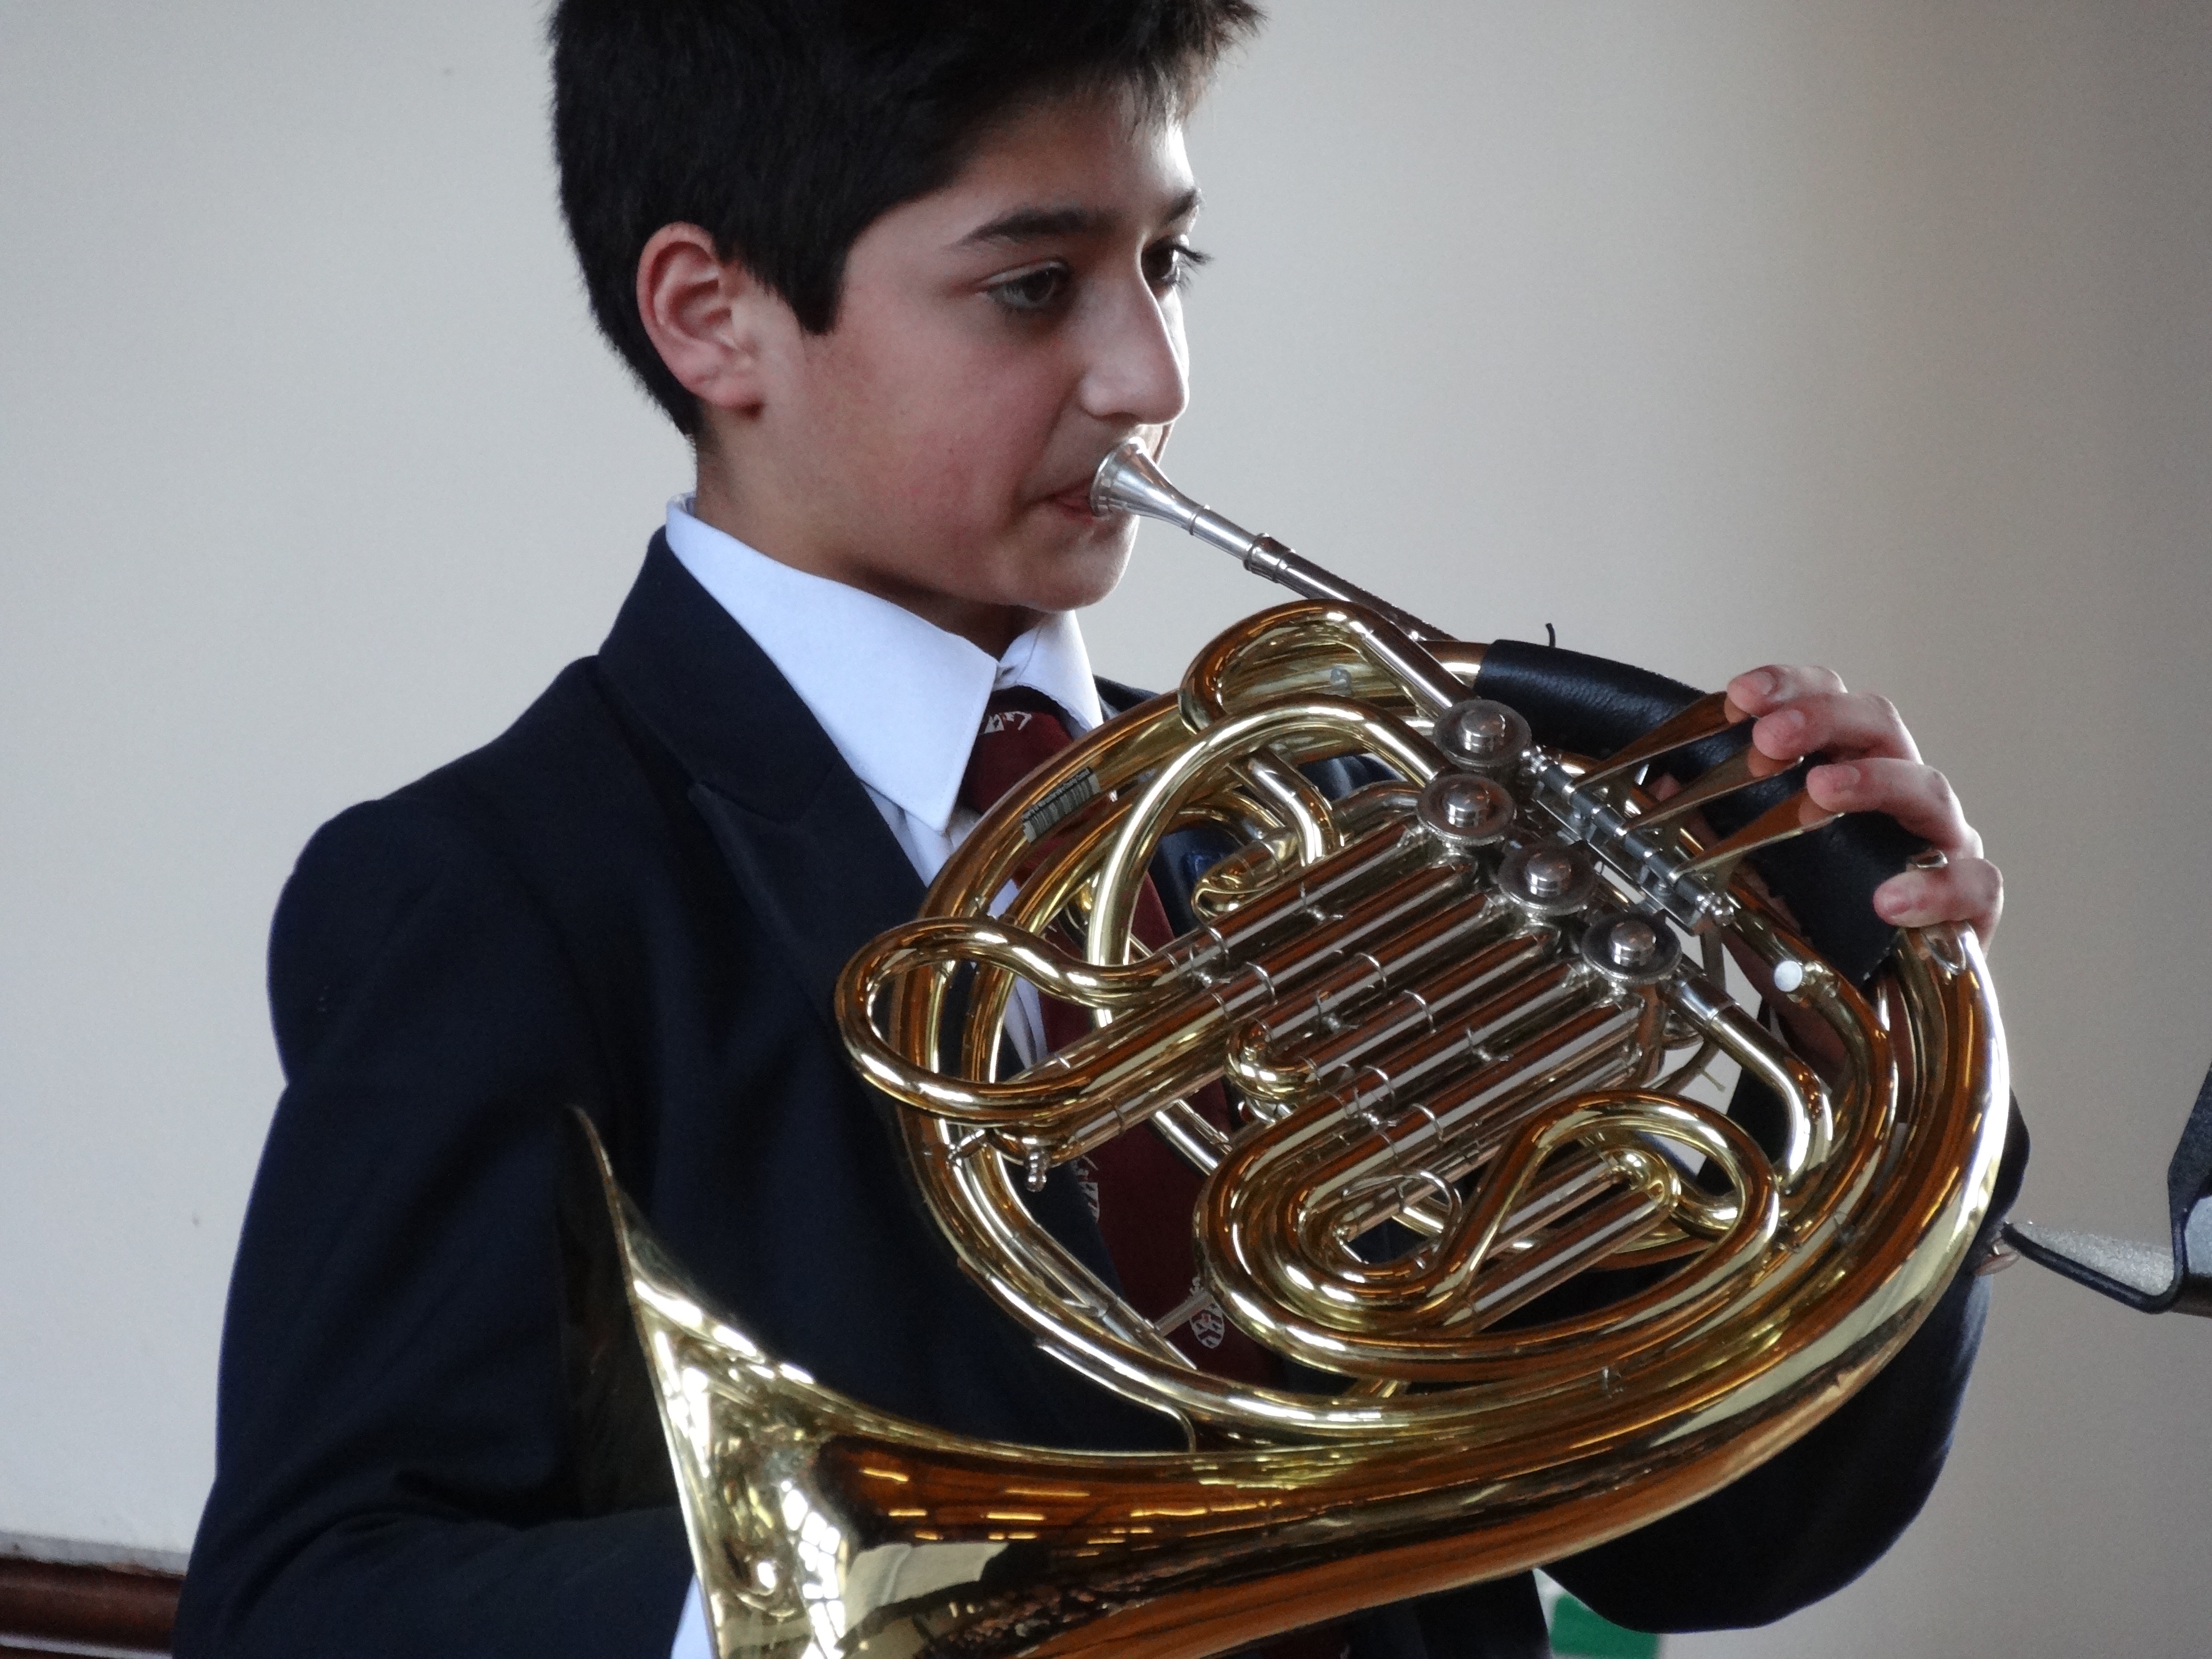 Years 6, 7 and 8 House Music Competition, March 2015